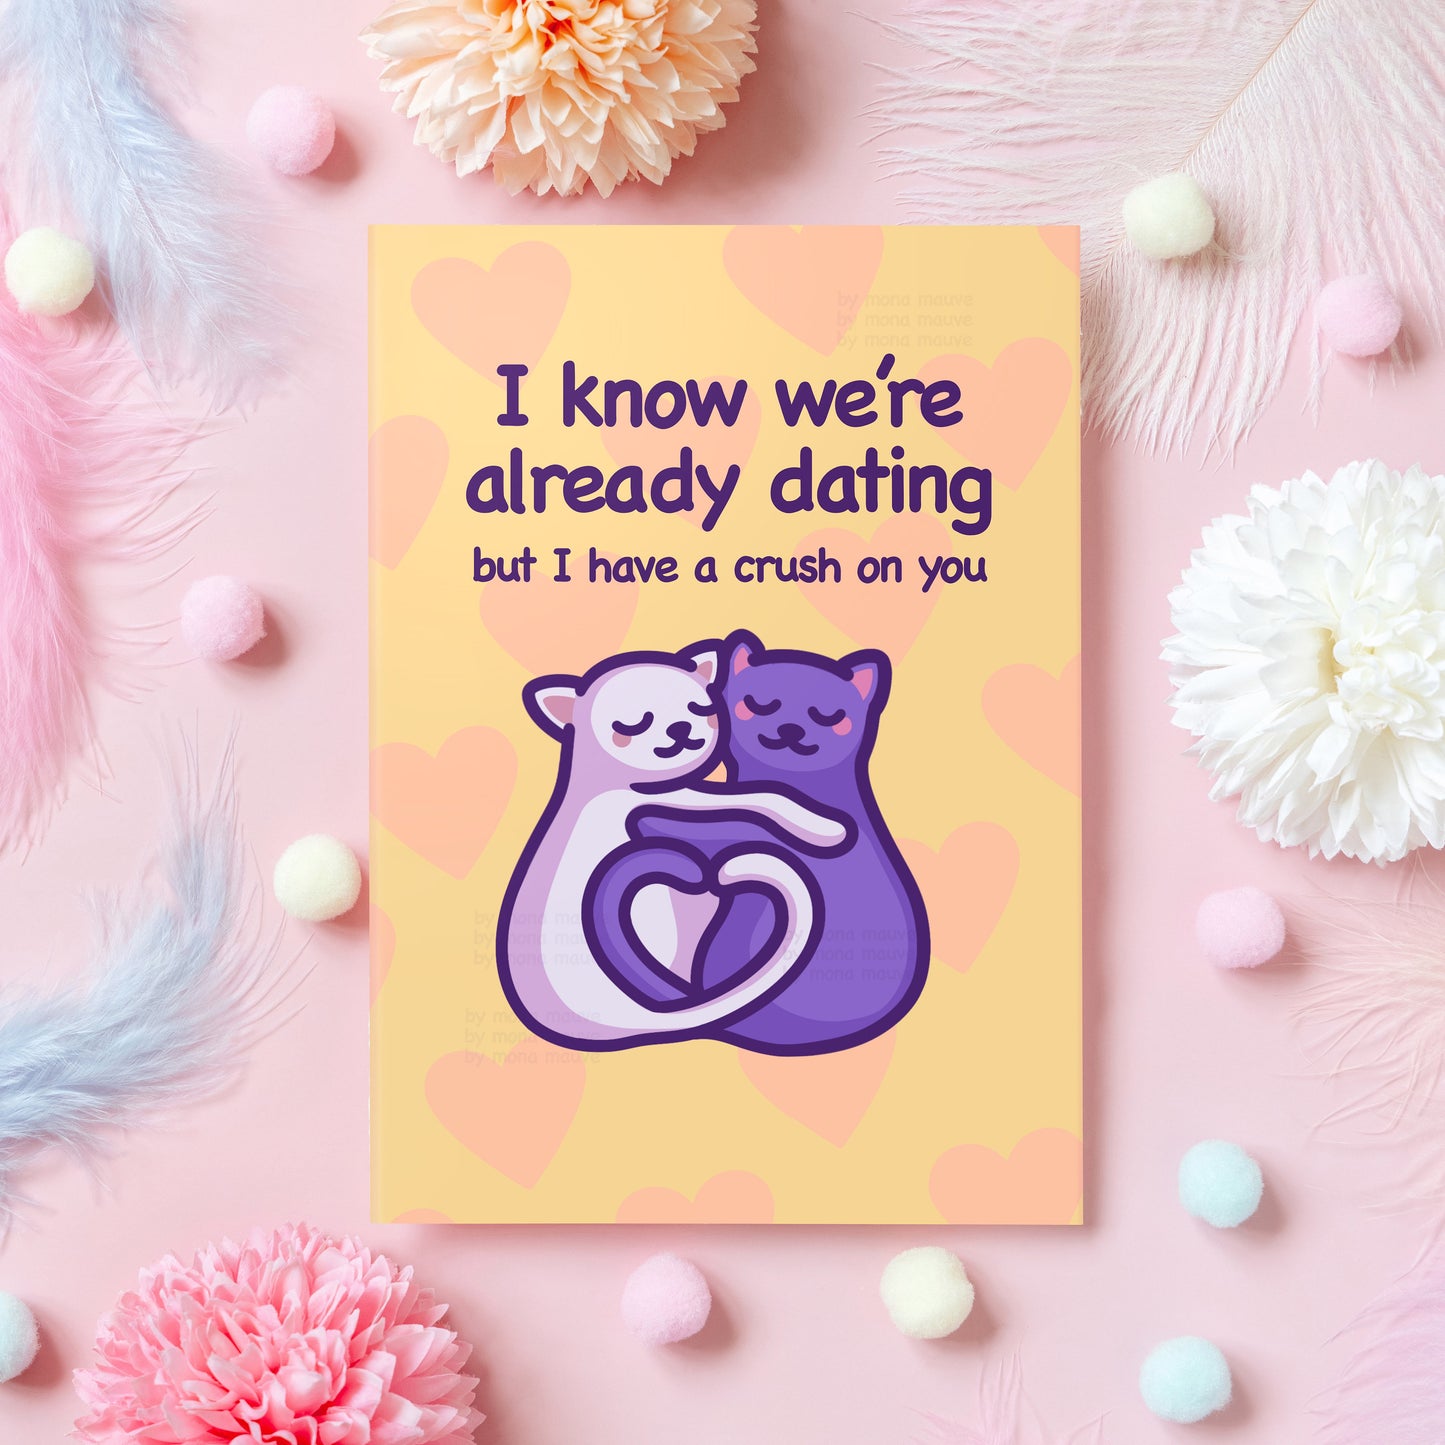 I Know We’re Dating, but I Have a Crush on You | Funny Anniversary Card